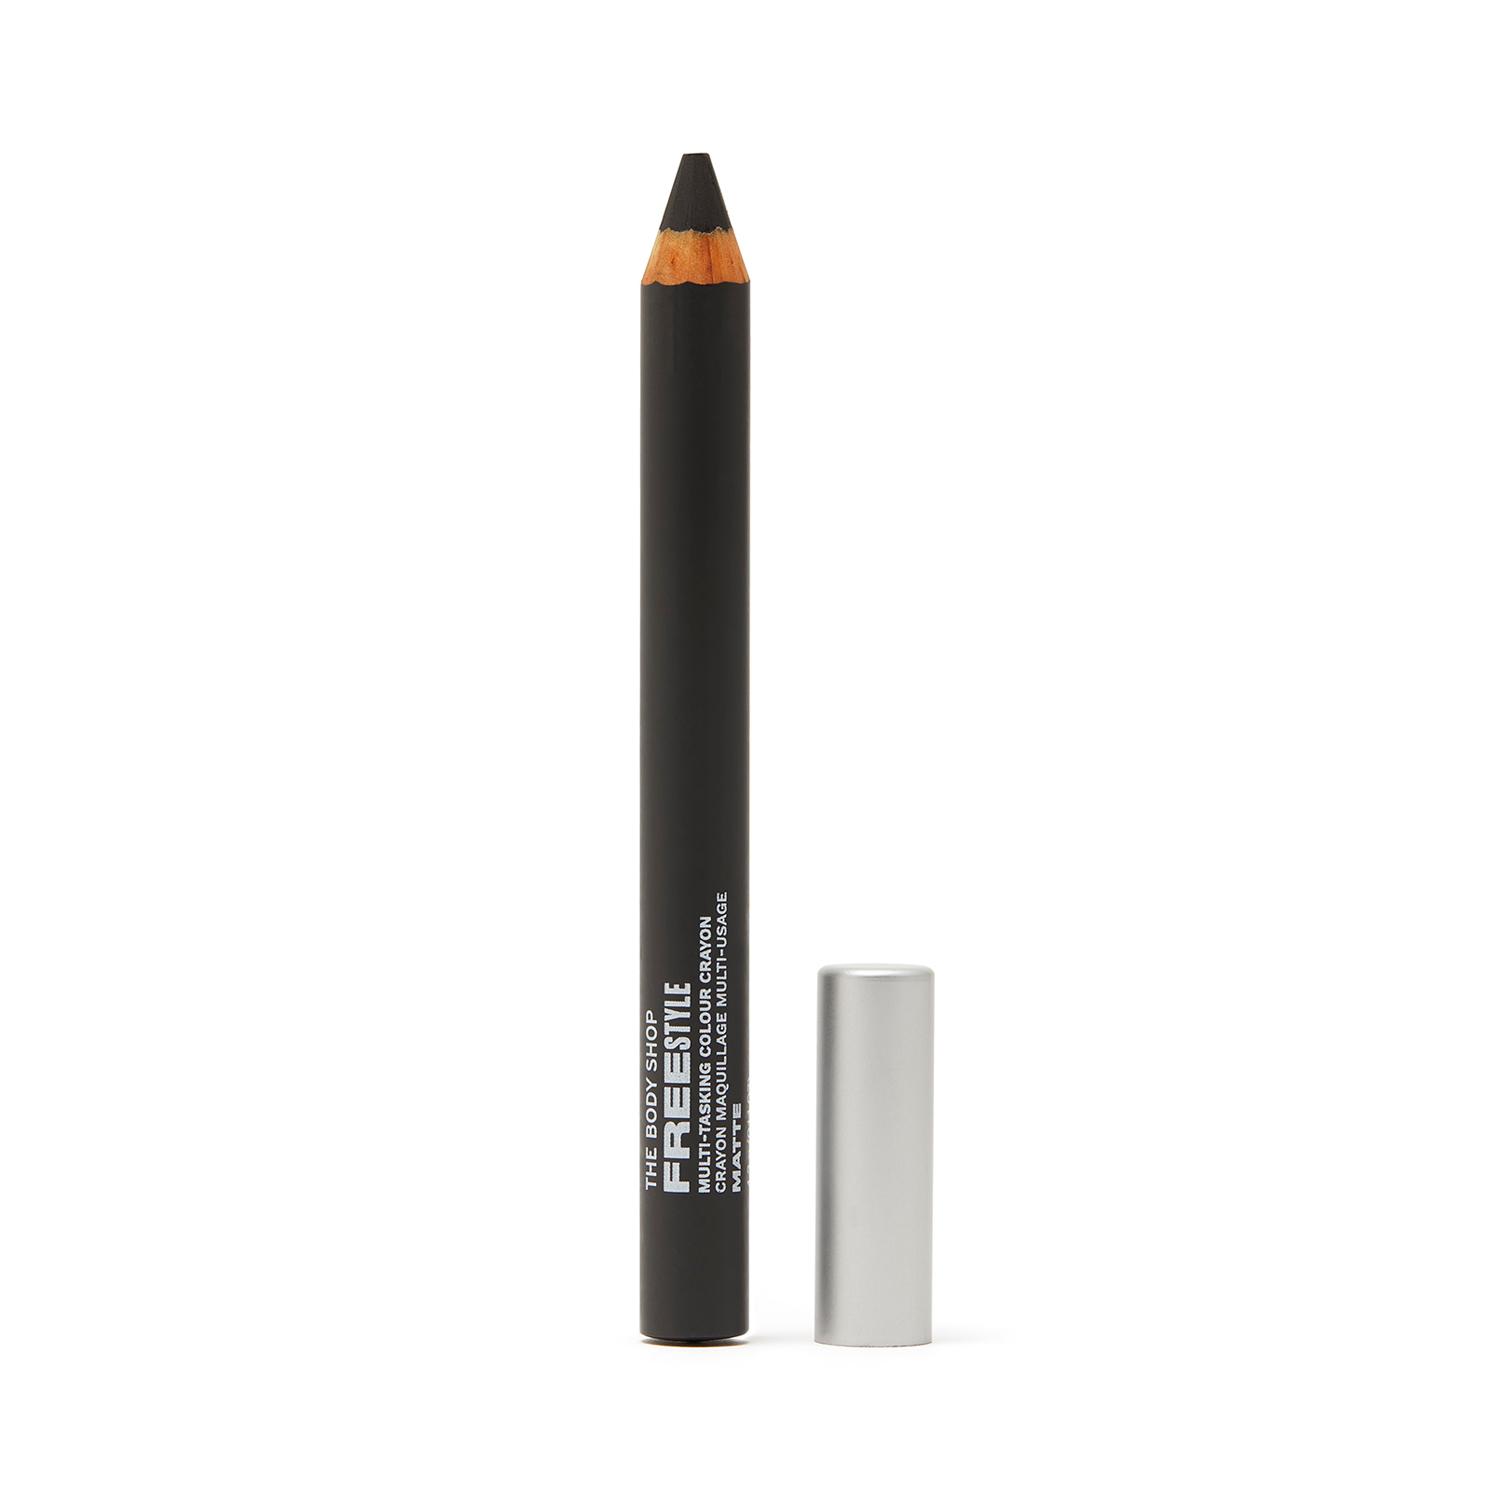 The Body Shop | The Body Shop Freestyle Multi-Tasking Crayons - Challenge (4.2 g)